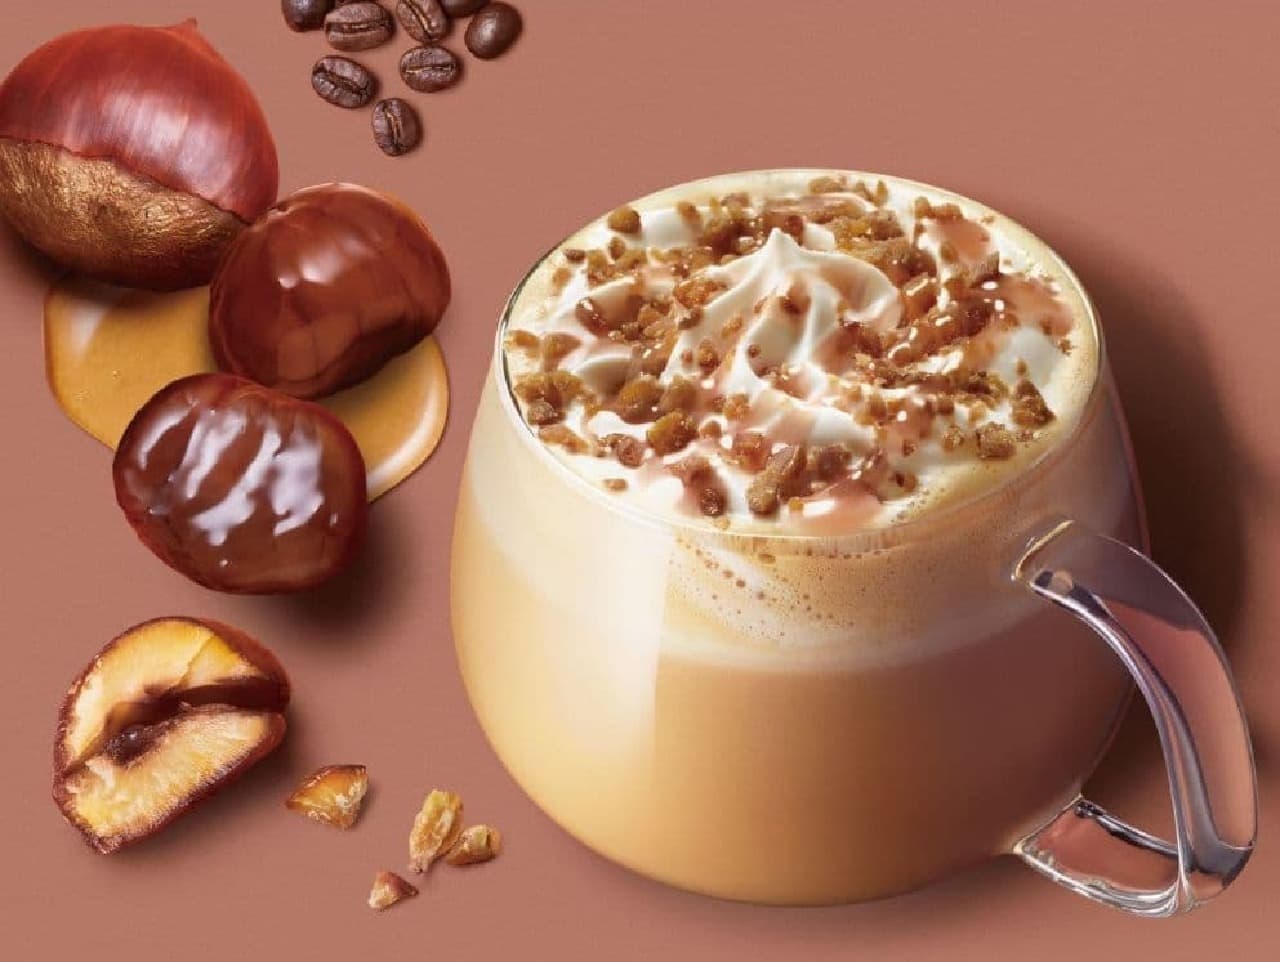 Mont Blanc Latte" limited to Starbucks East Japan area